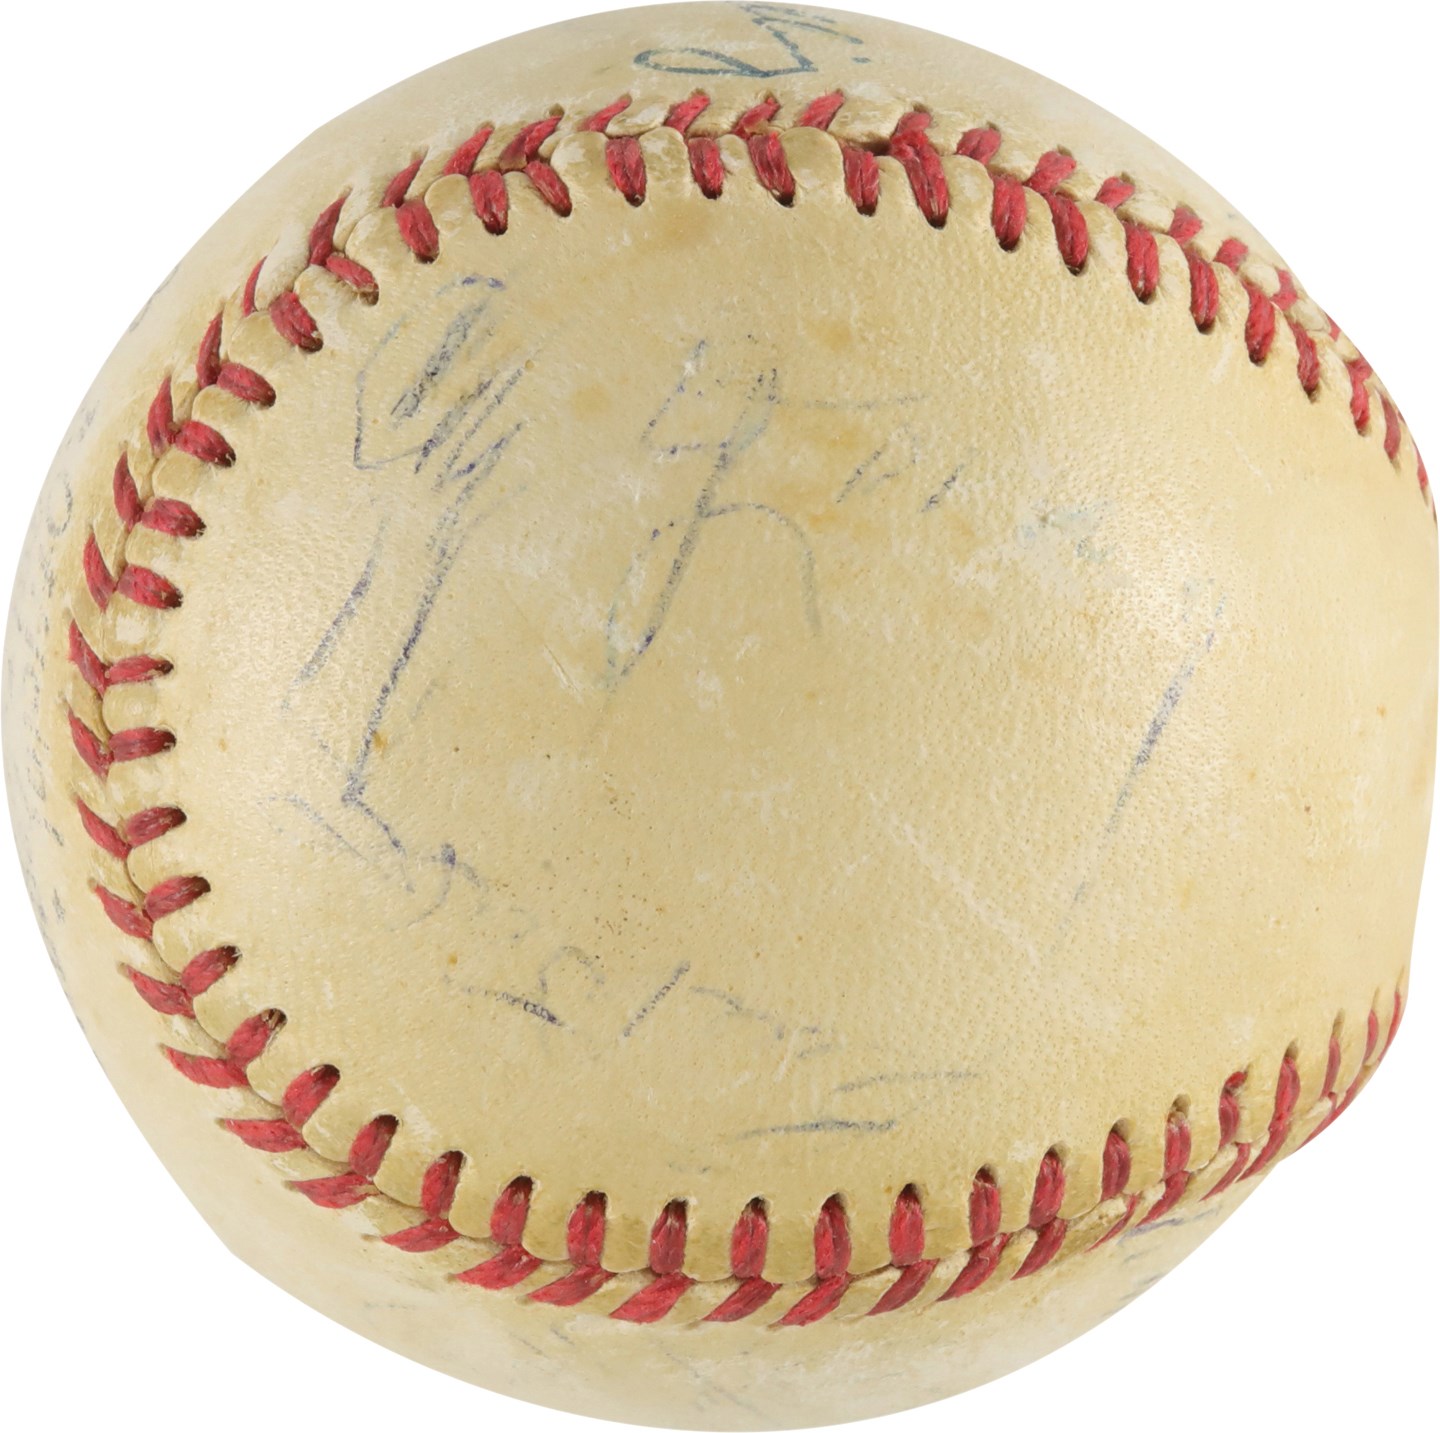 - 1954 New York Yankees and Stars Team-Signed Baseball w/Cy Young & Mickey Mantle (JSA)